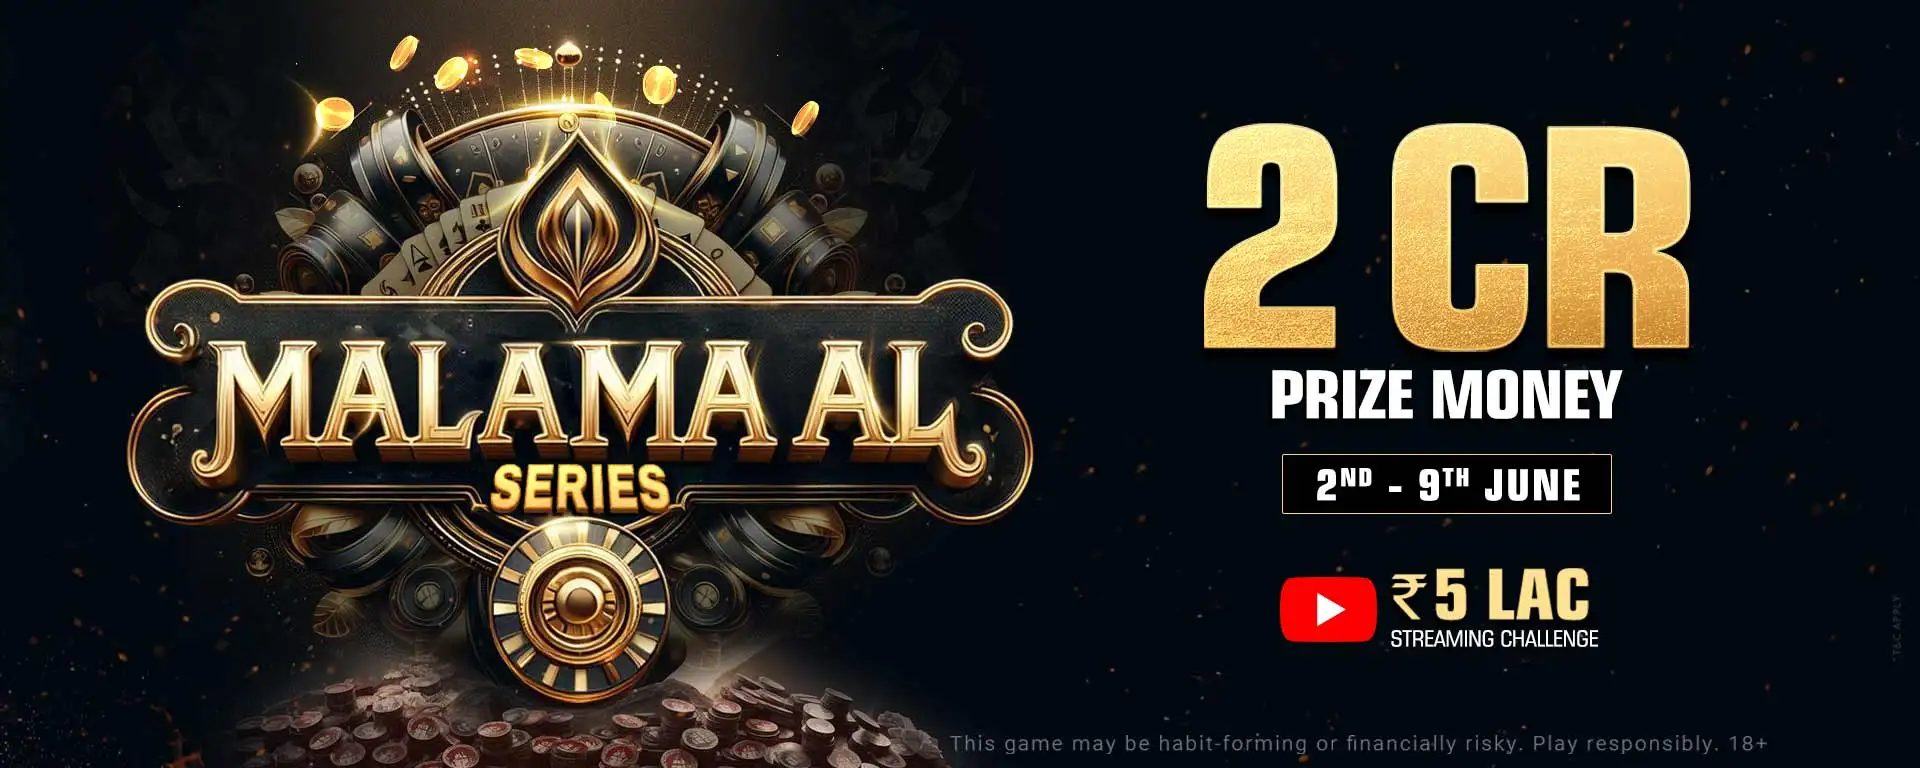 Ready to Become Malamaal? Join the MALAMAAL SERIES With a Rs. 2 CRORE Prize Pool!